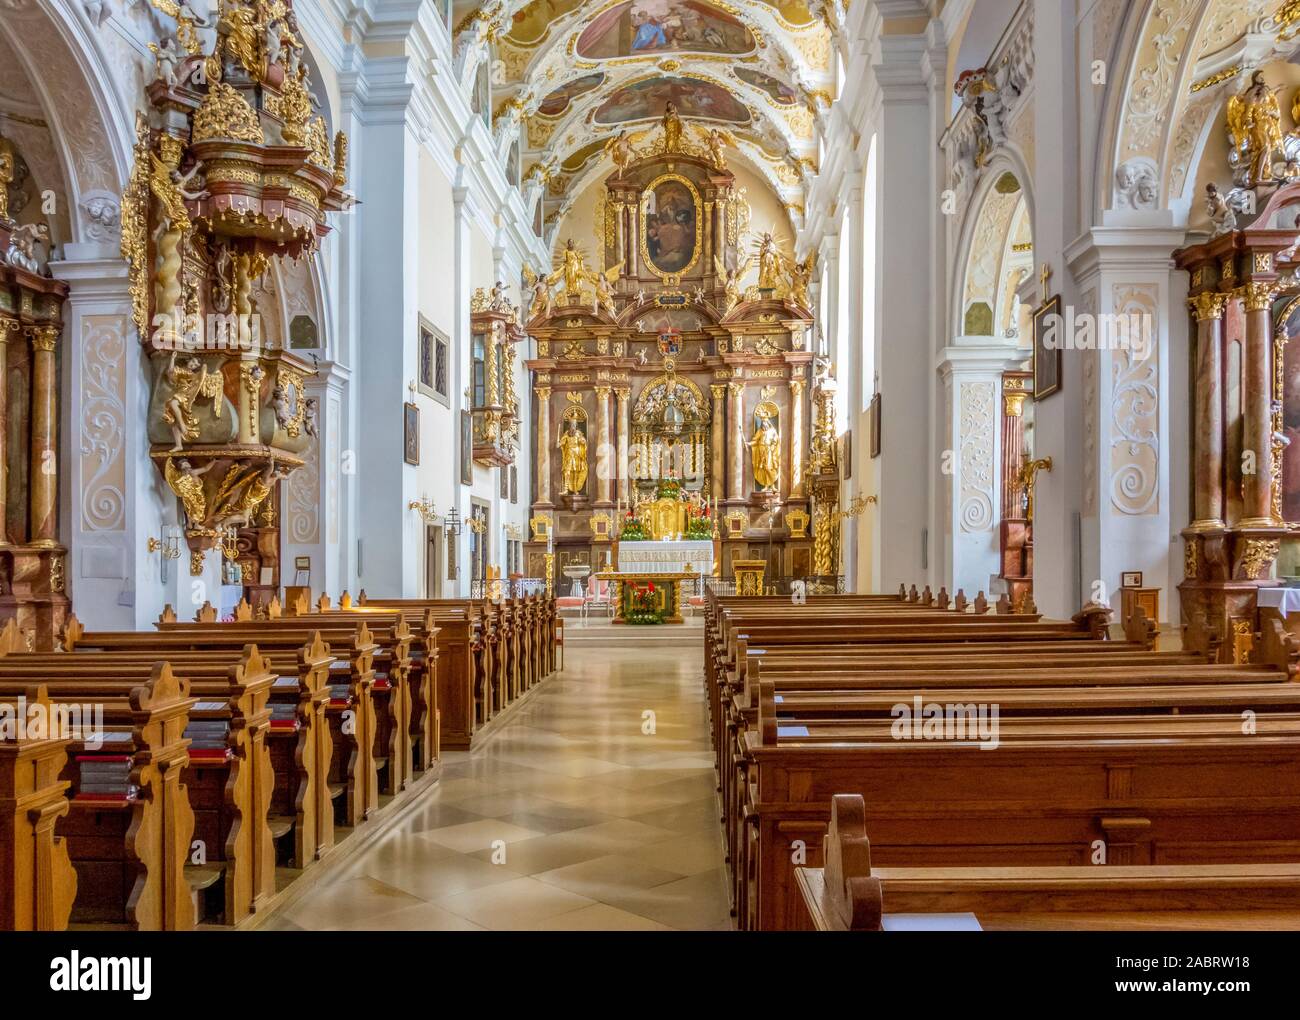 impression in the Basilica church with the Franciscan monastery in Frauenkirchen, a town in Austria Stock Photo